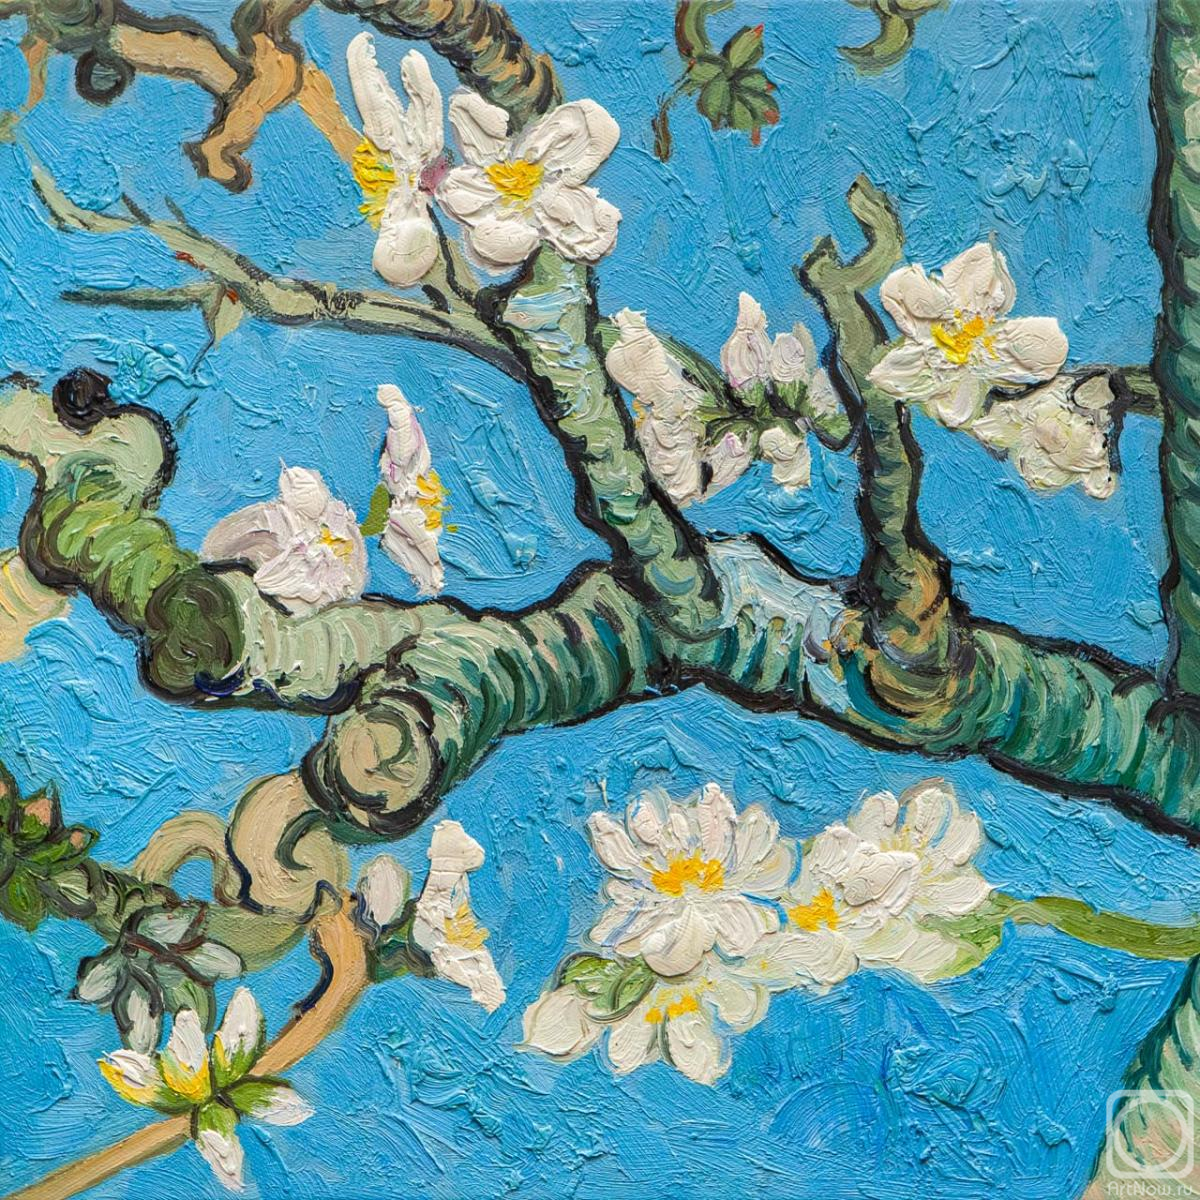 Vlodarchik Andjei. Free copy of Van Goghs painting Blossoming Almond Branches. Painting one